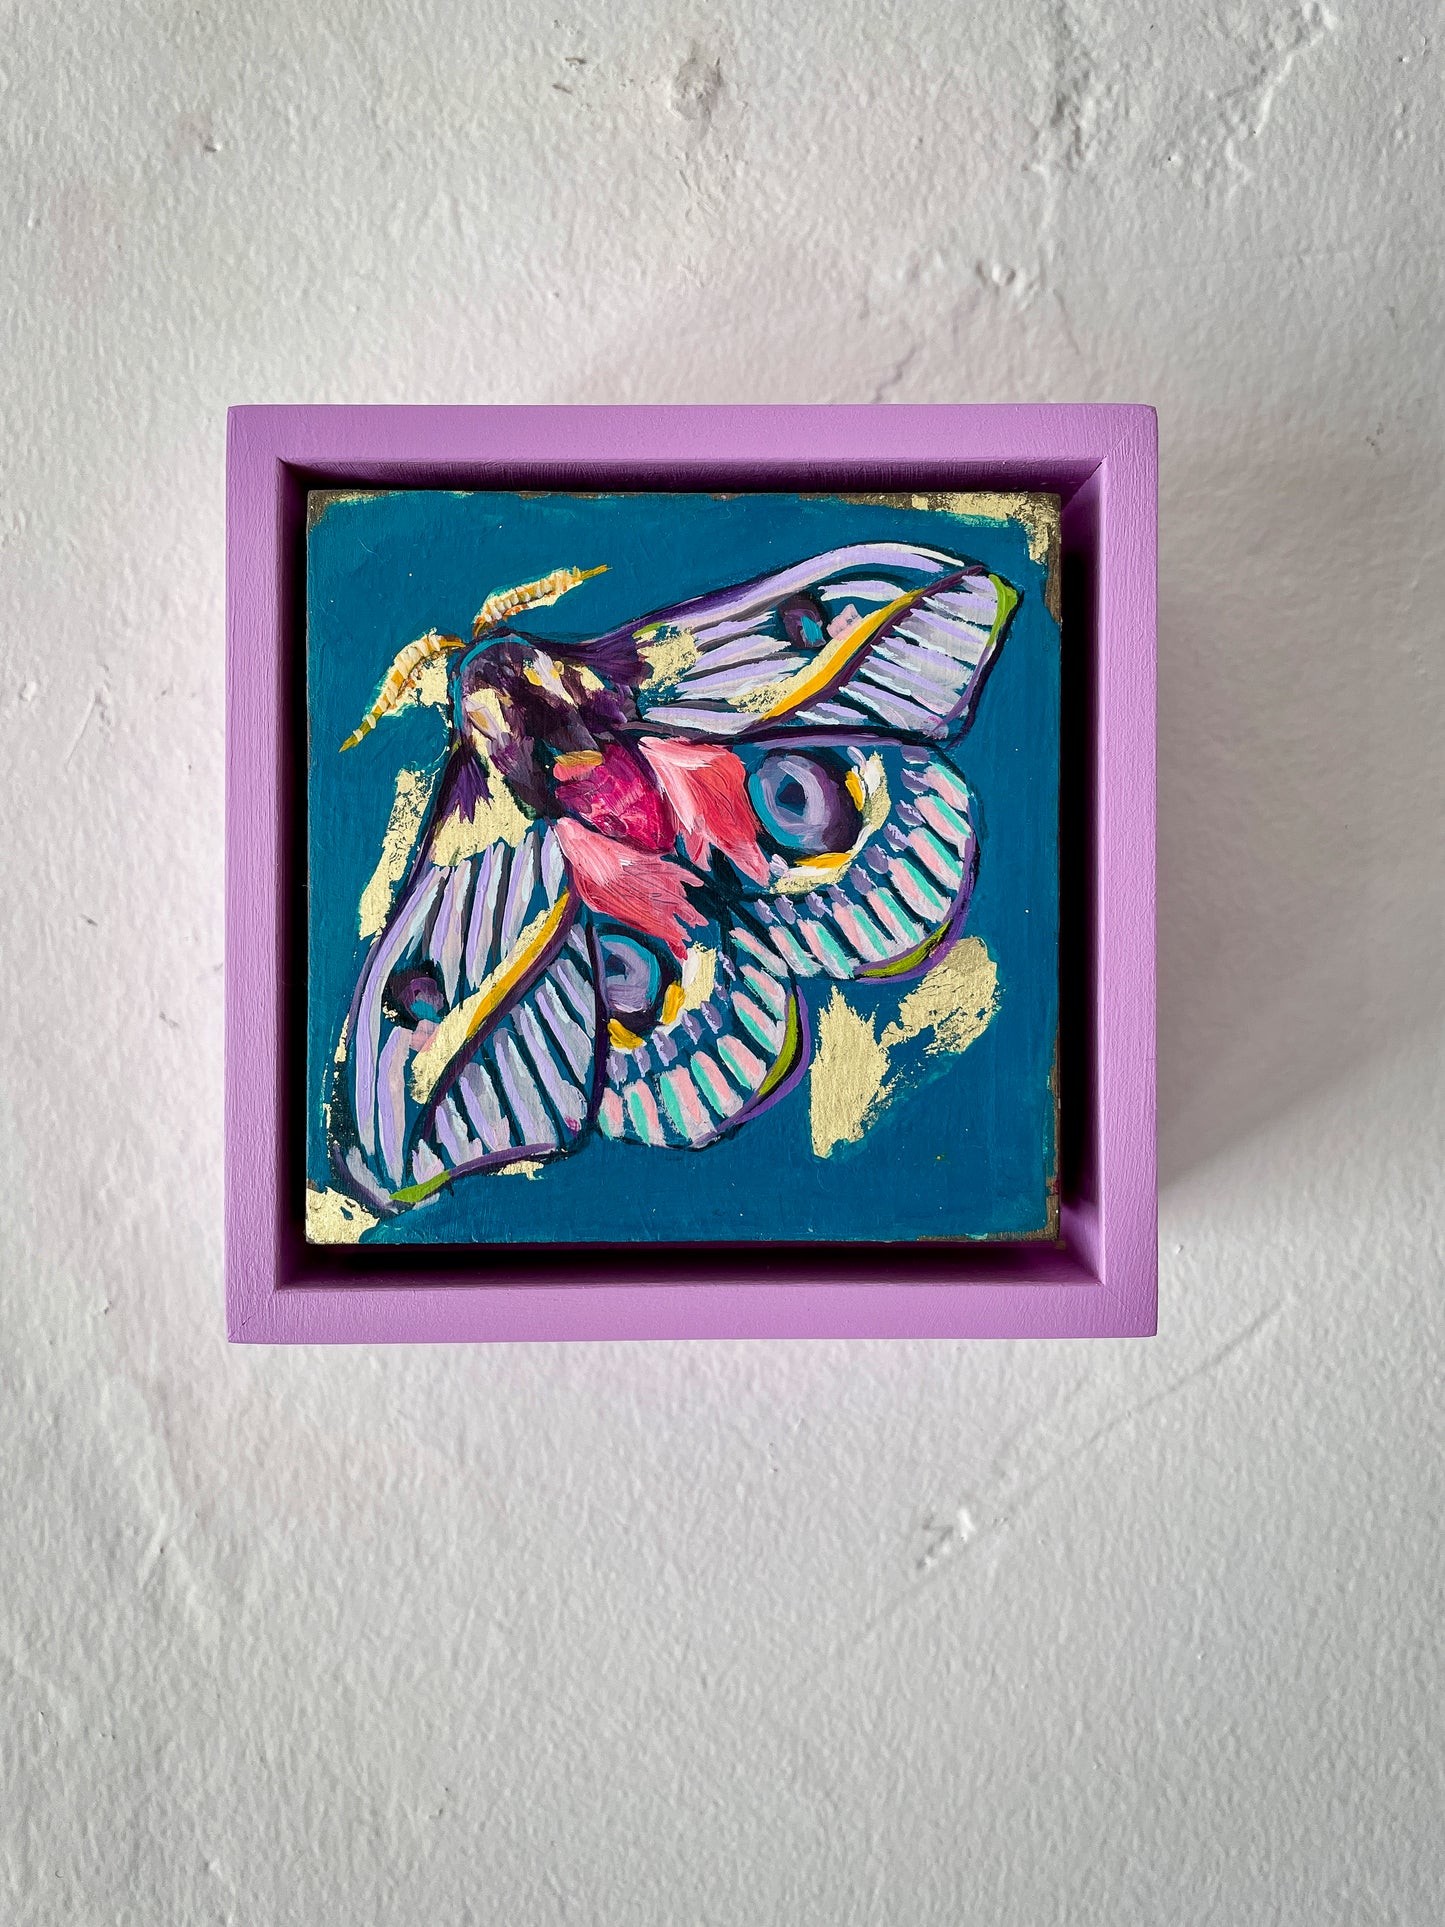 Colorful whimsical painting of a moth in blues, purples, pinks with touch of gold leaf; 5"x5" incl painted frame; artist Shaney Watters; shown on wall in situ